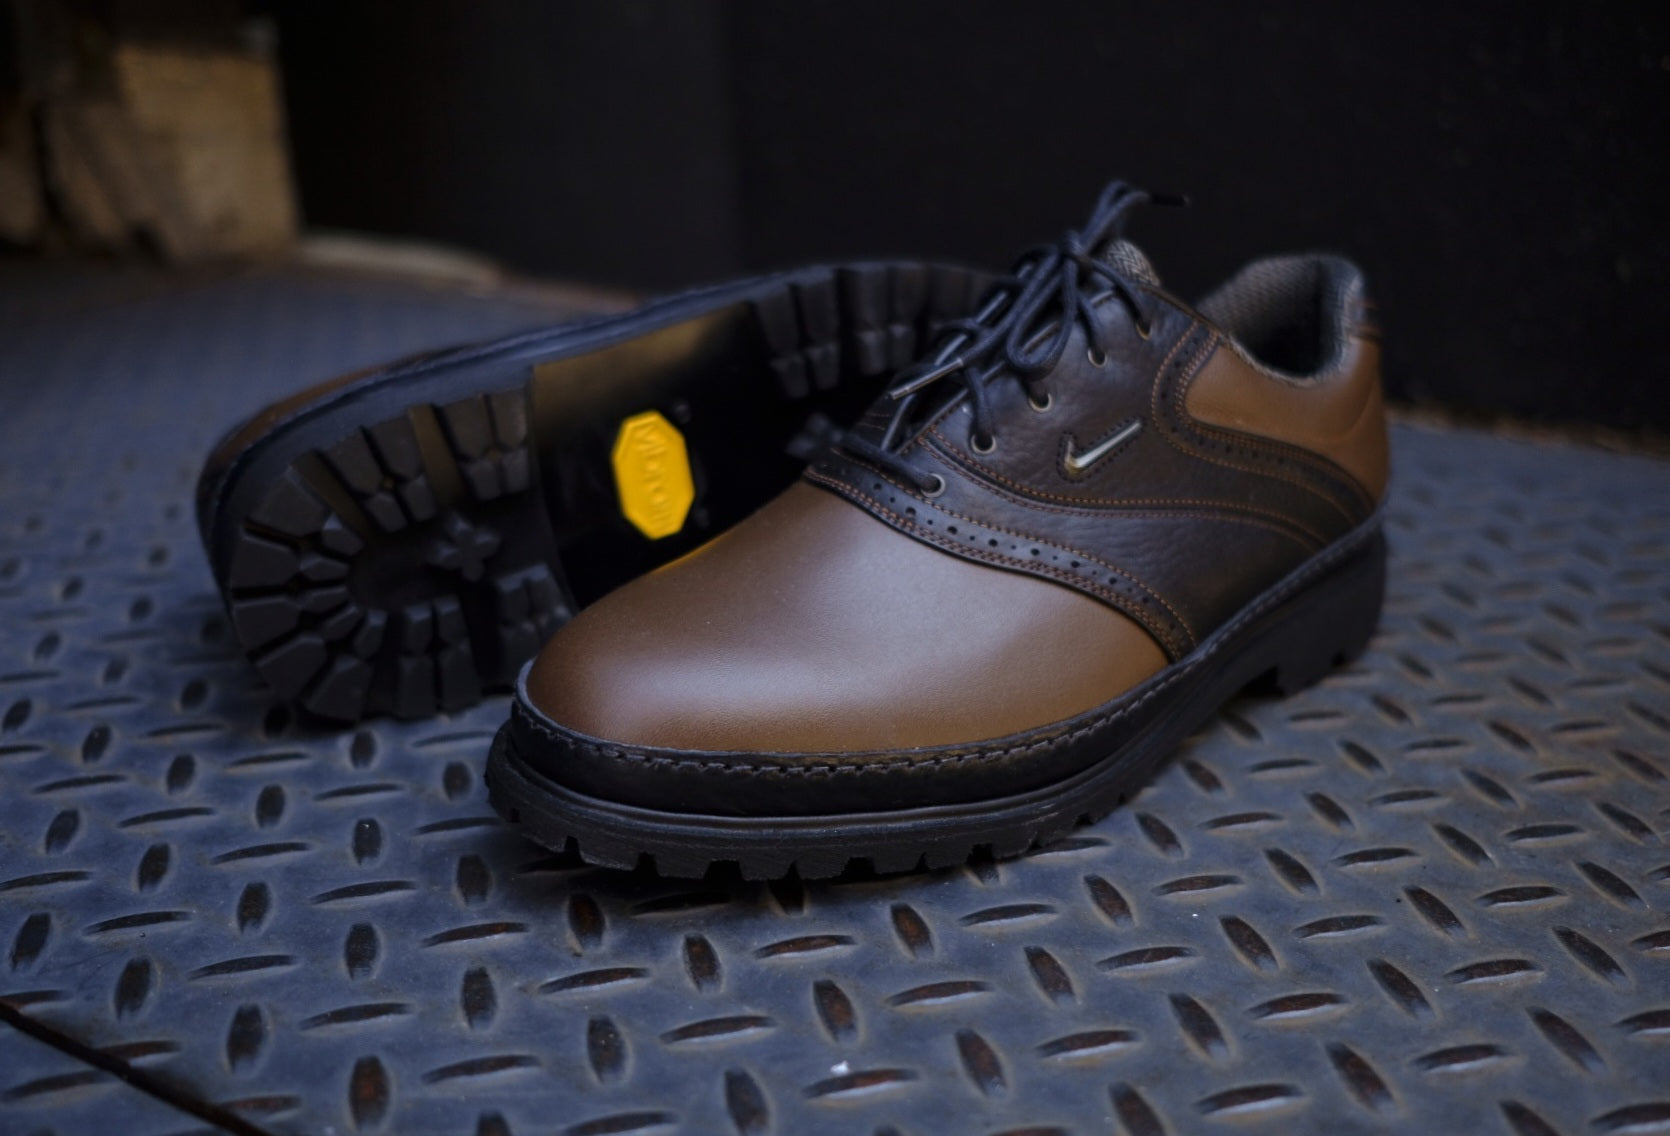 reconstructed nike golf derby shoes - m us 8.5